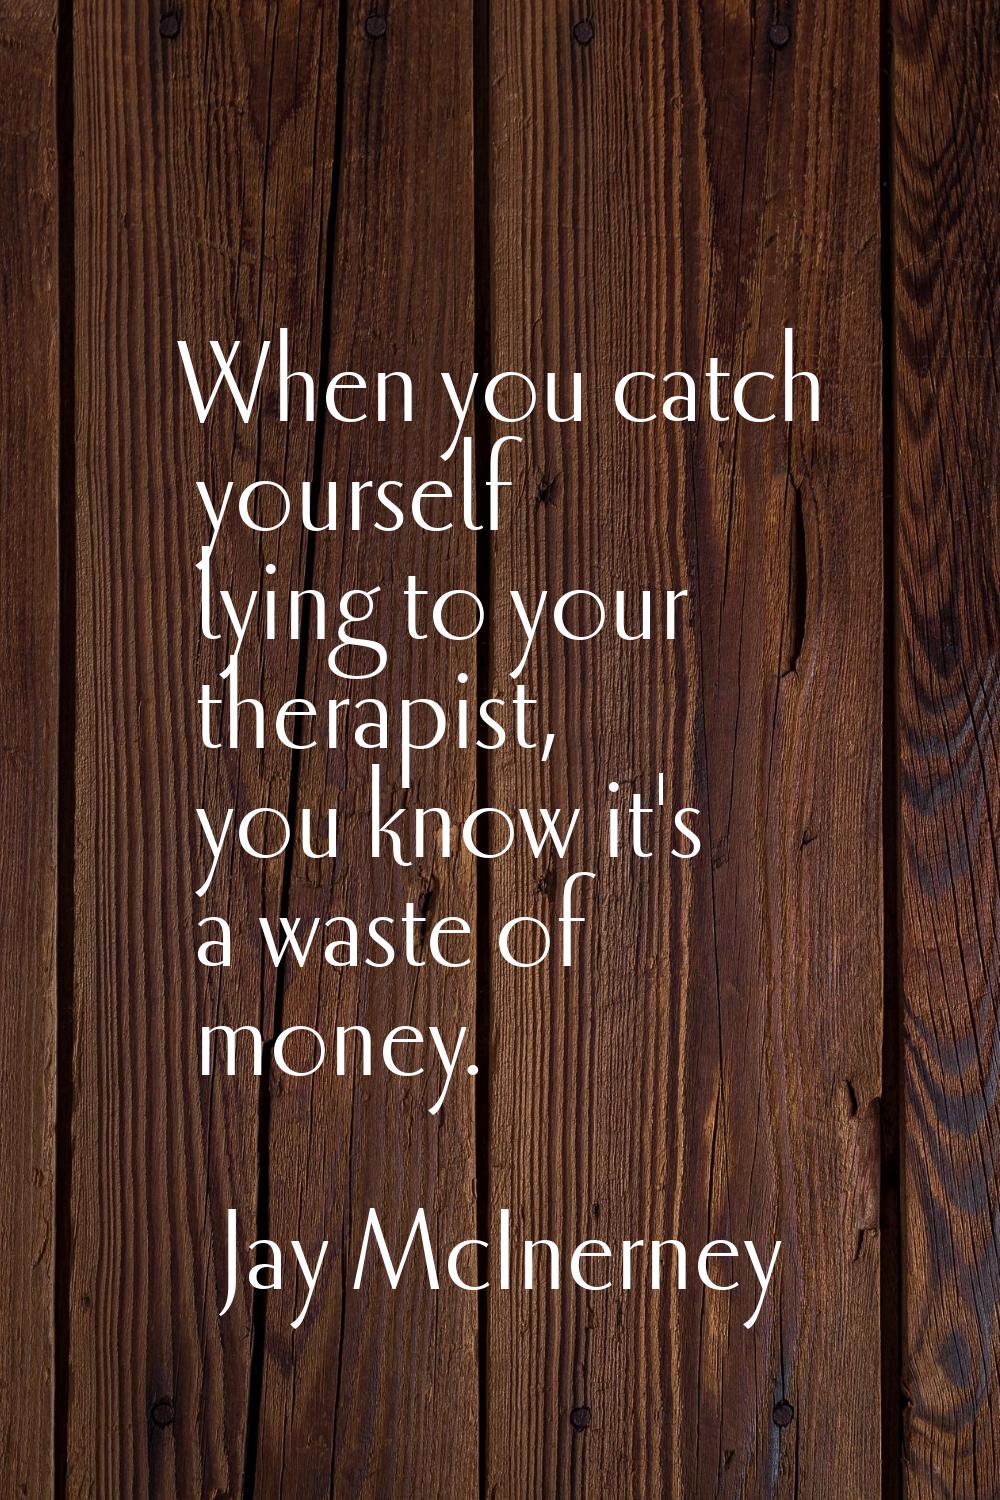 When you catch yourself lying to your therapist, you know it's a waste of money.